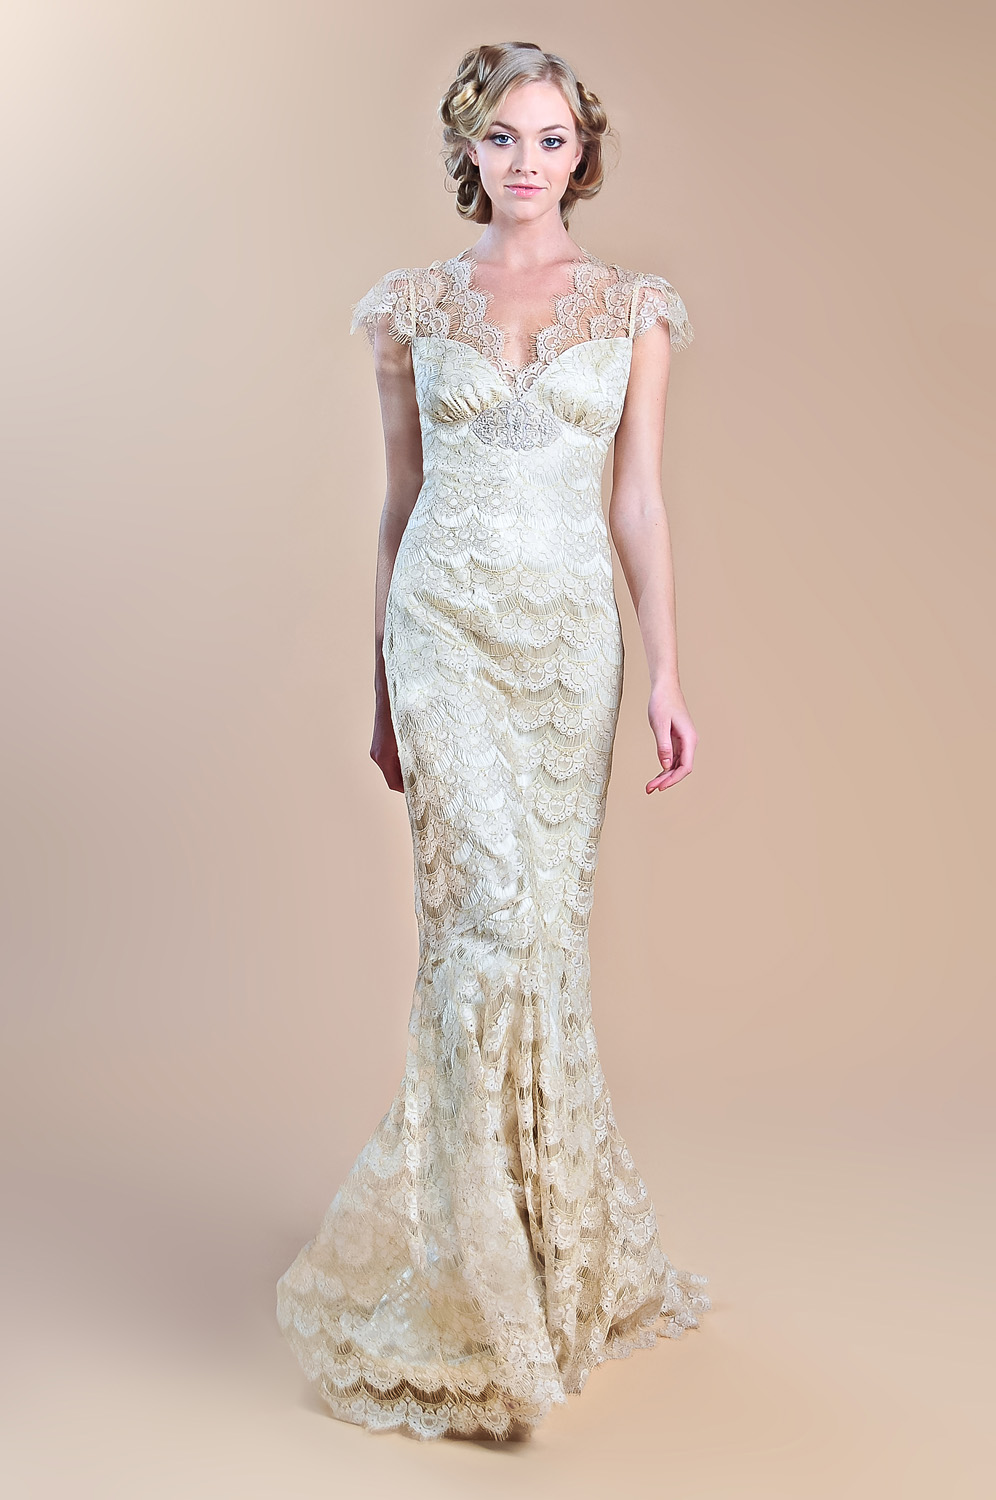 Eloquence by Claire Pettibone